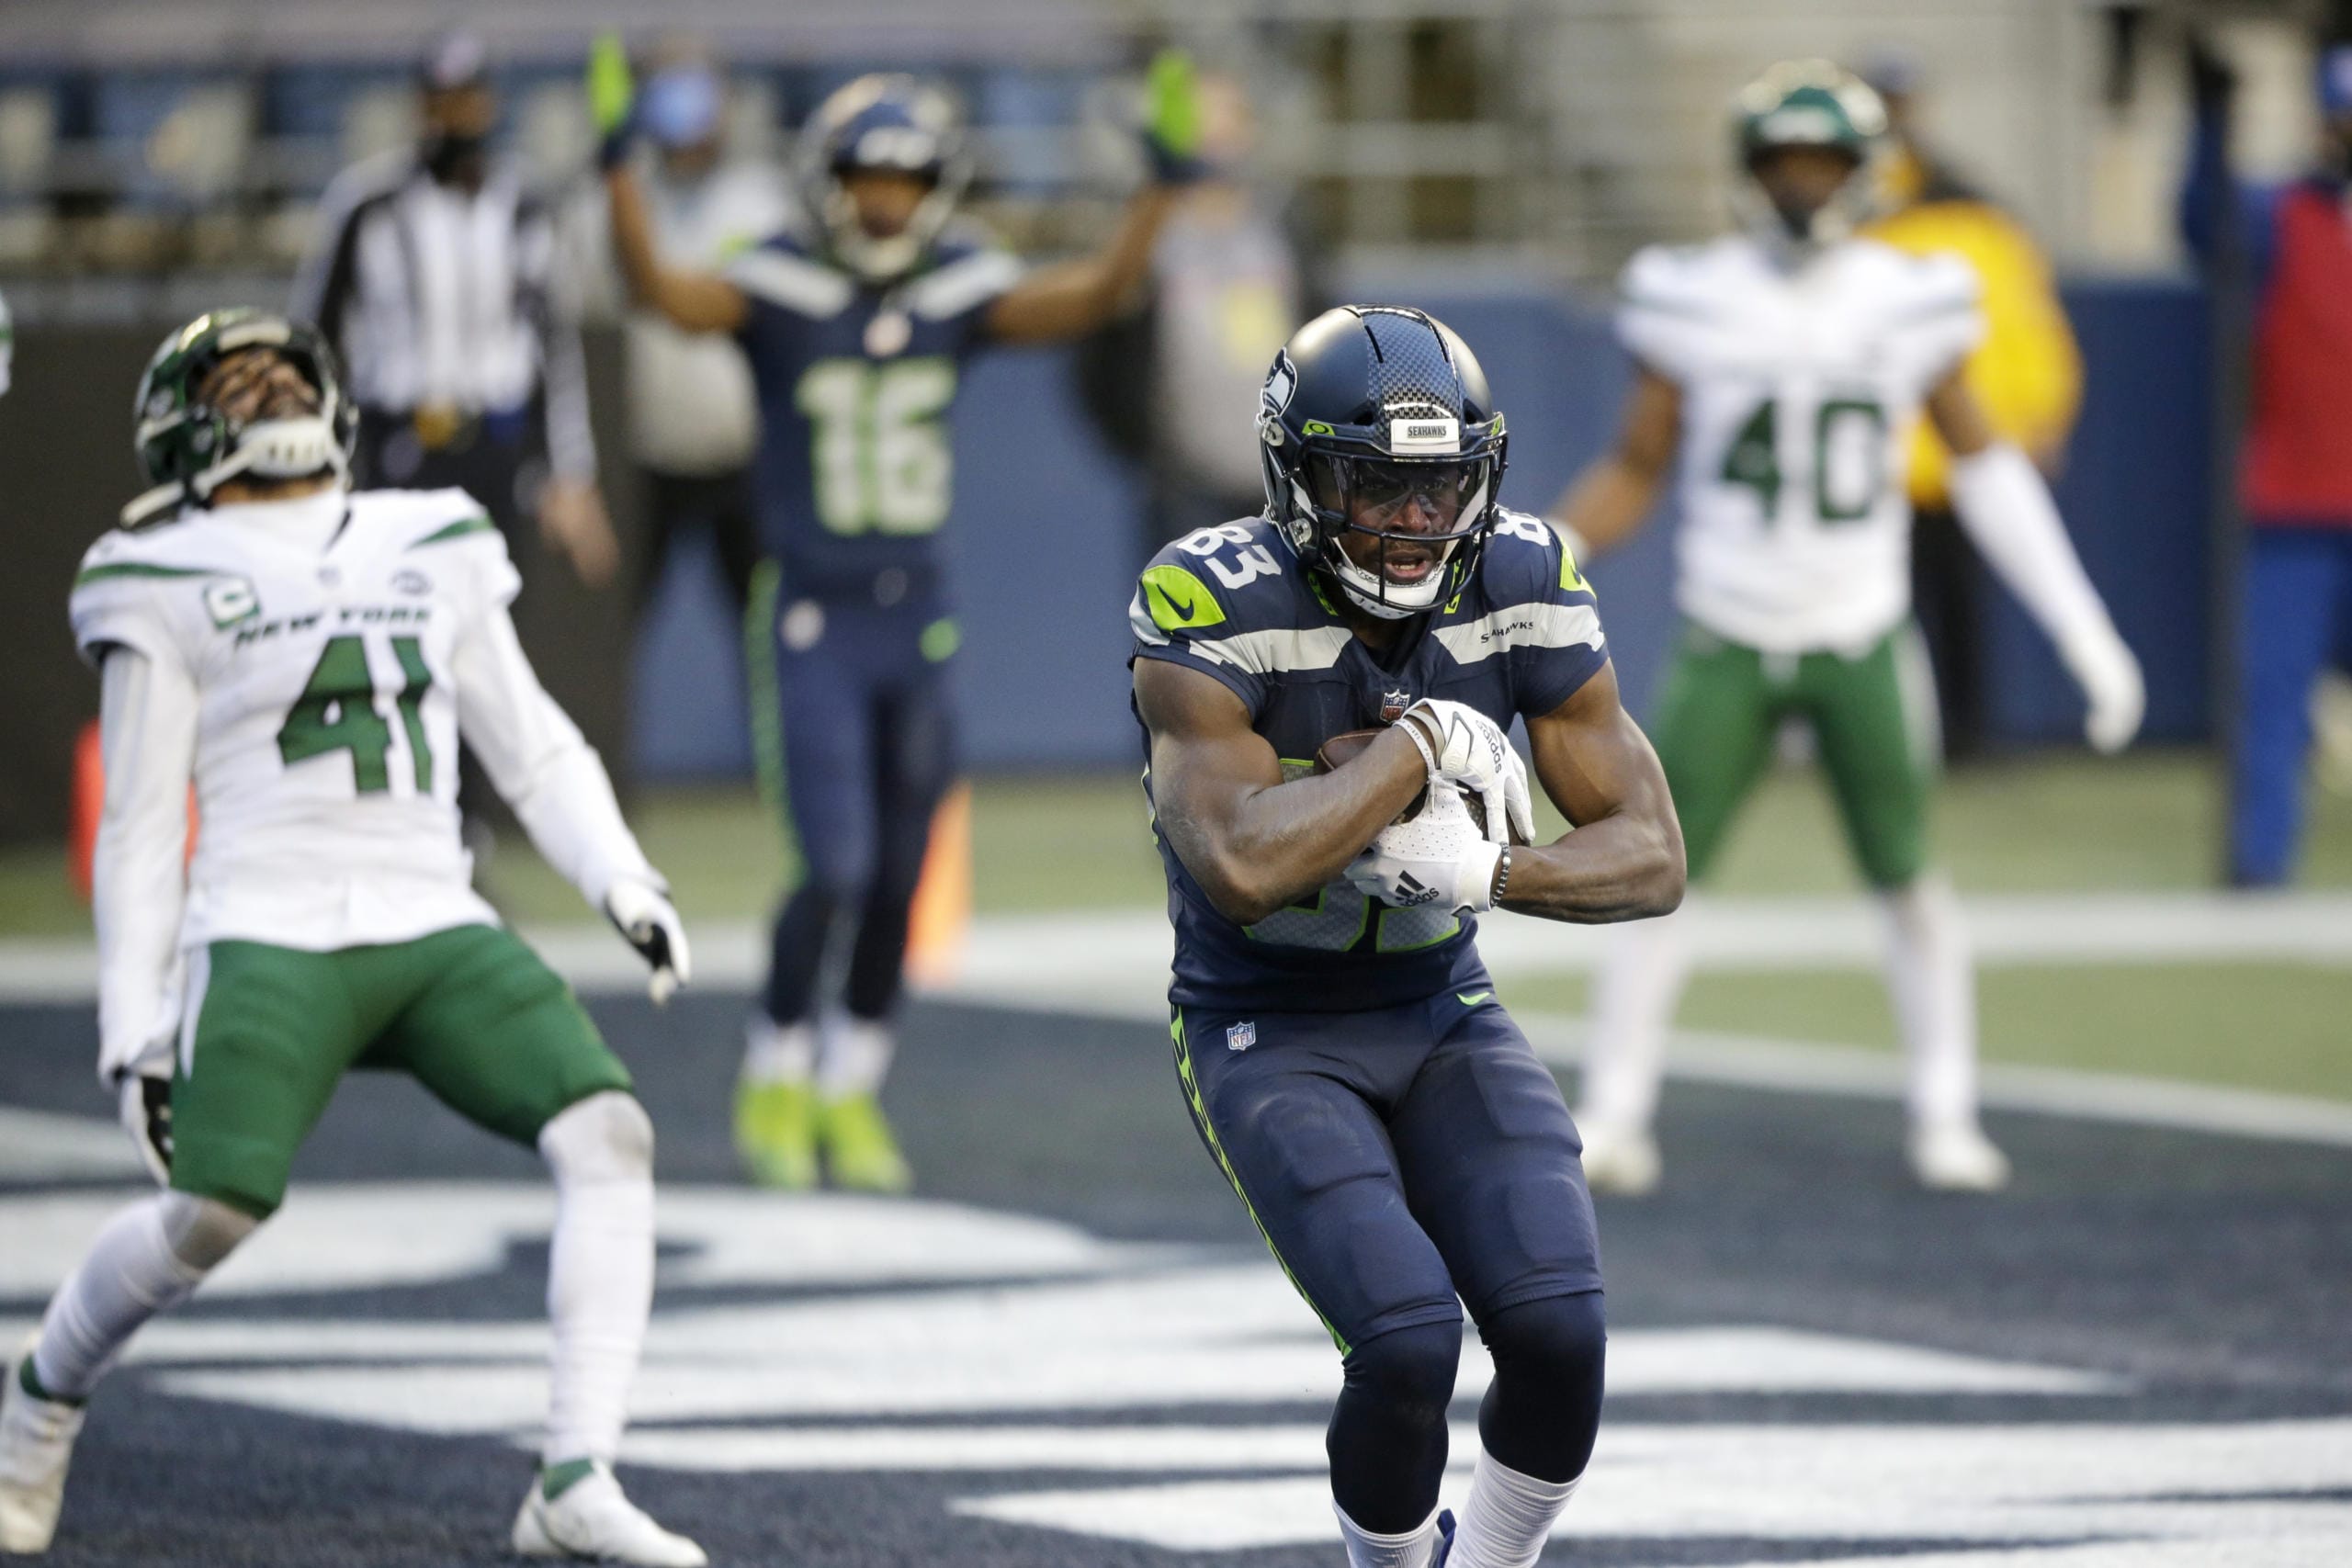 Seattle Seahawks wide receiver David Moore cradles the ball after catching a touchdown pass as New York Jets safety Matthias Farley (41) reacts behind during the second half of an NFL football game, Sunday, Dec. 13, 2020, in Seattle.